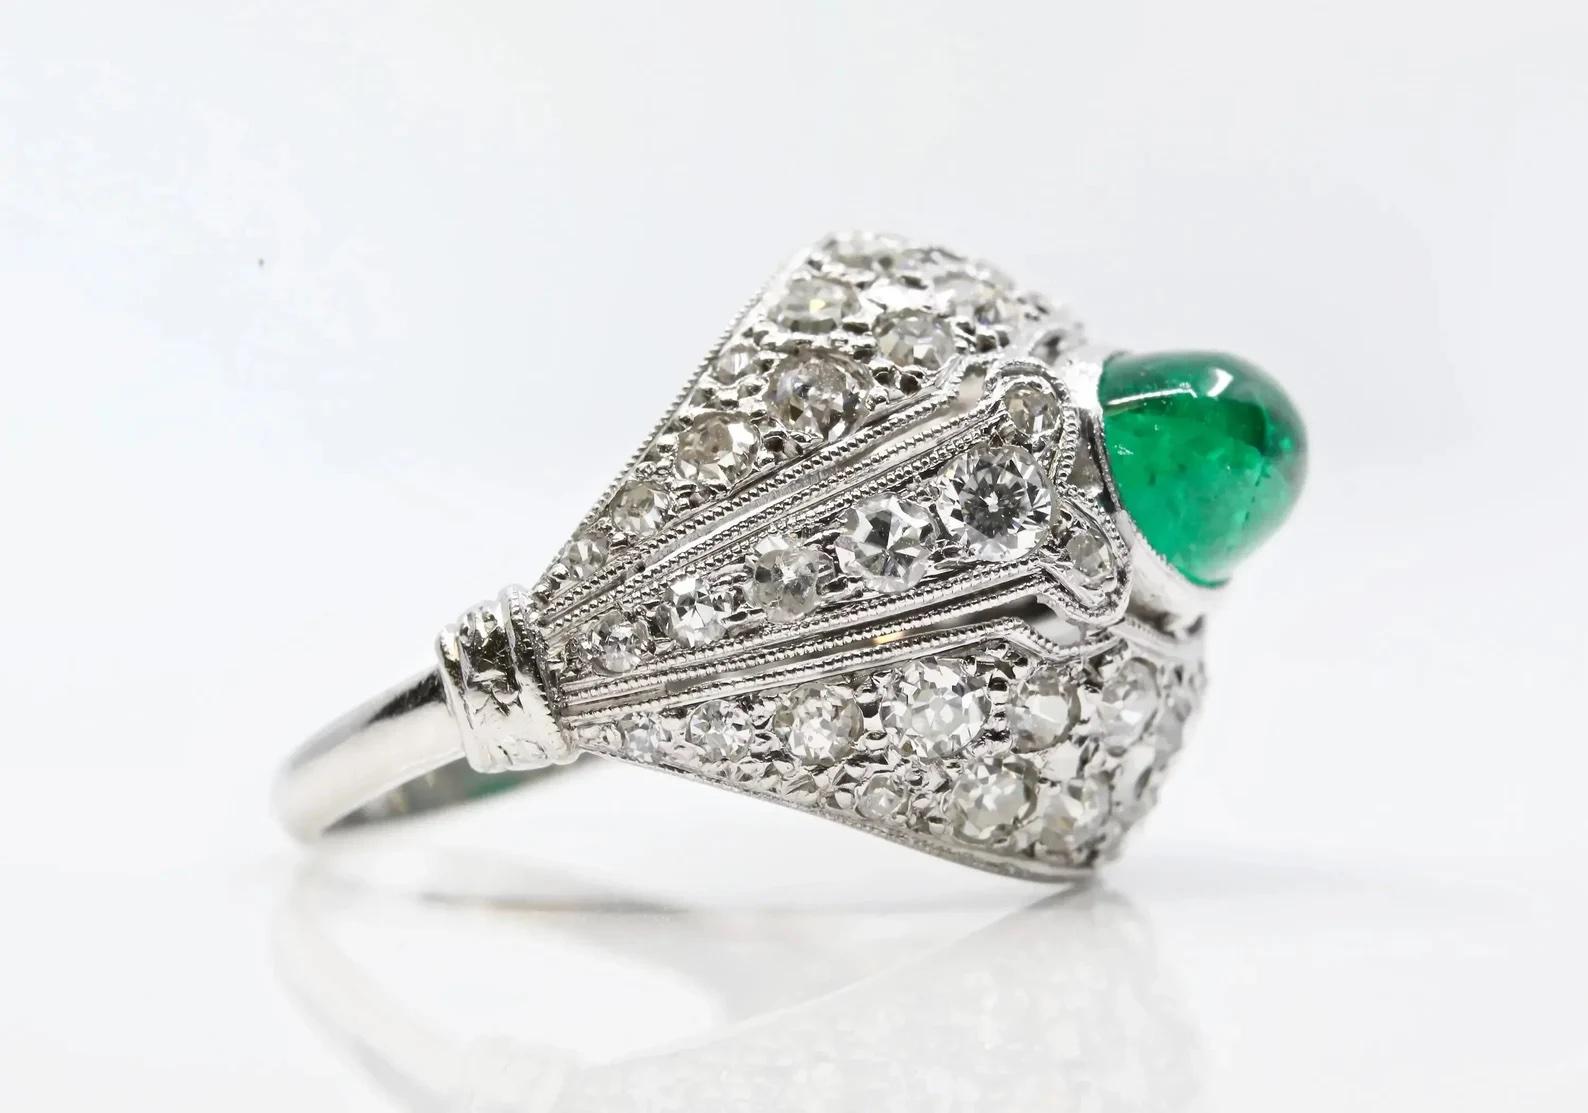 A handmade French Art Deco period Cabochon Emerald, and diamond ring in platinum. Weighing approximately 2.20 carats, the center bezel set emerald is a beautiful Colombian gem of gorgeous rich vivid green color. Accenting the emerald are a total of